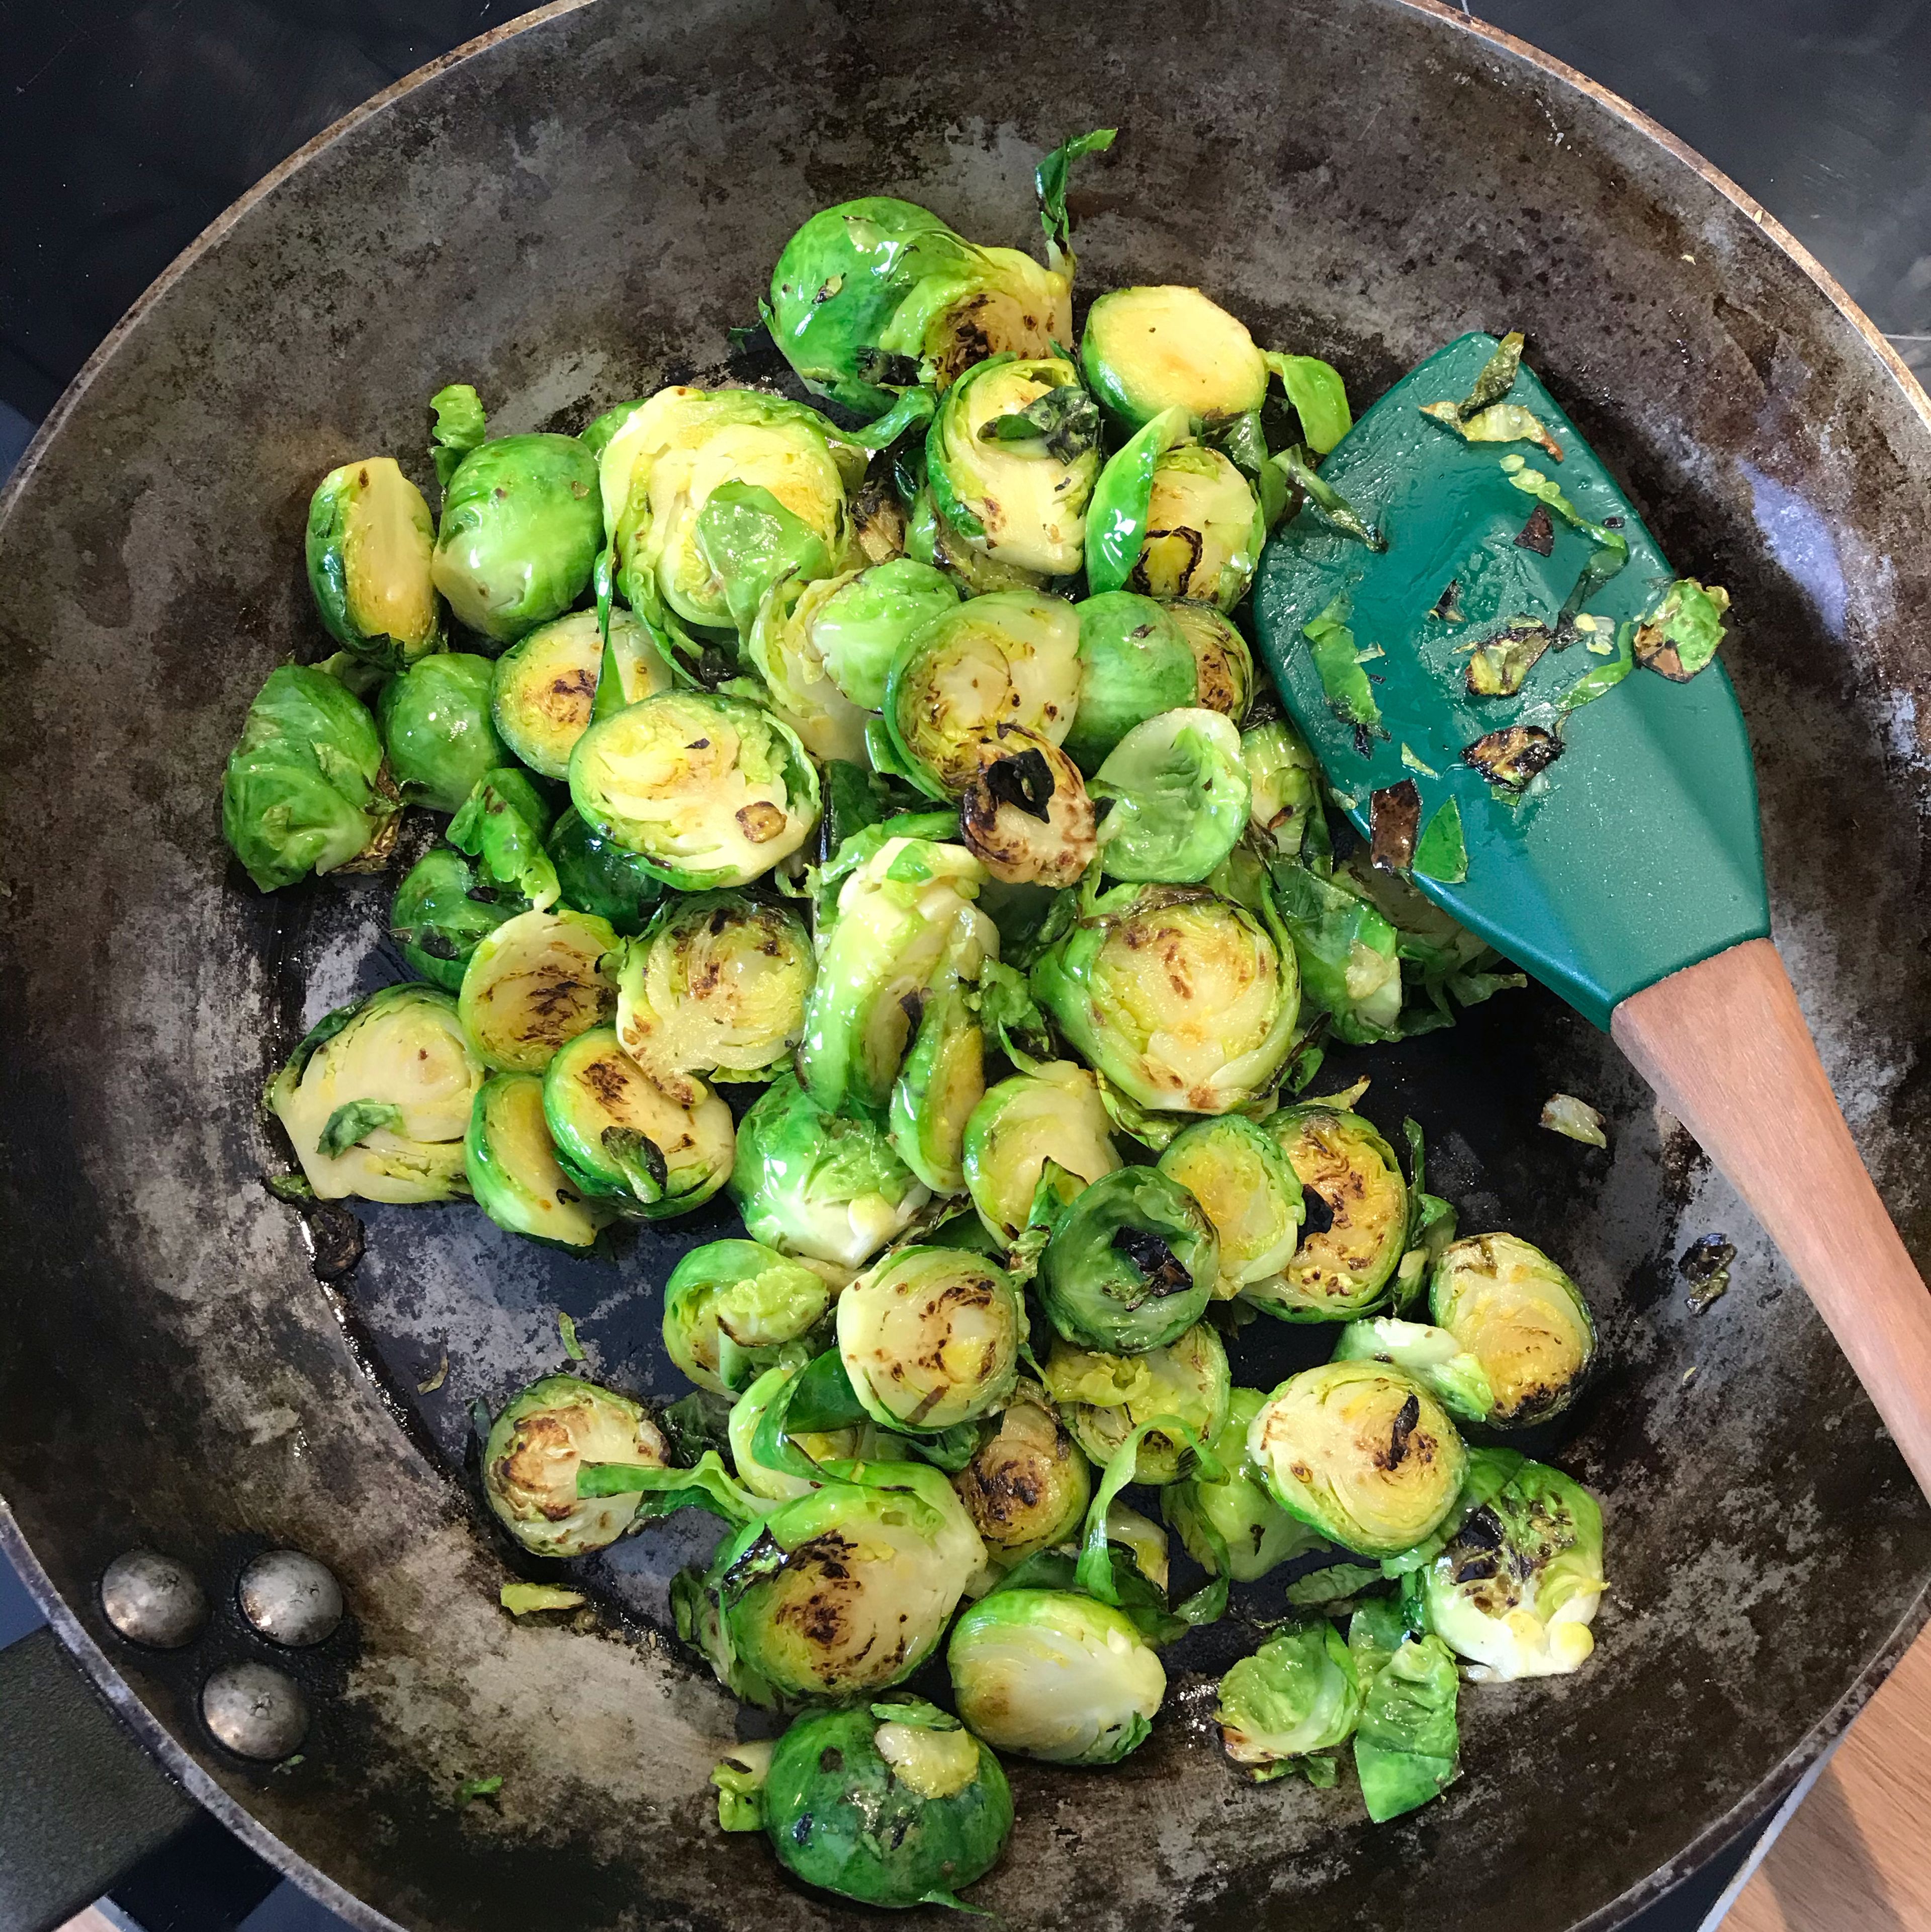 First of all, fry the coconut chips in a pan without oil. Then add sesame oil and fry the Brussels sprouts properly.